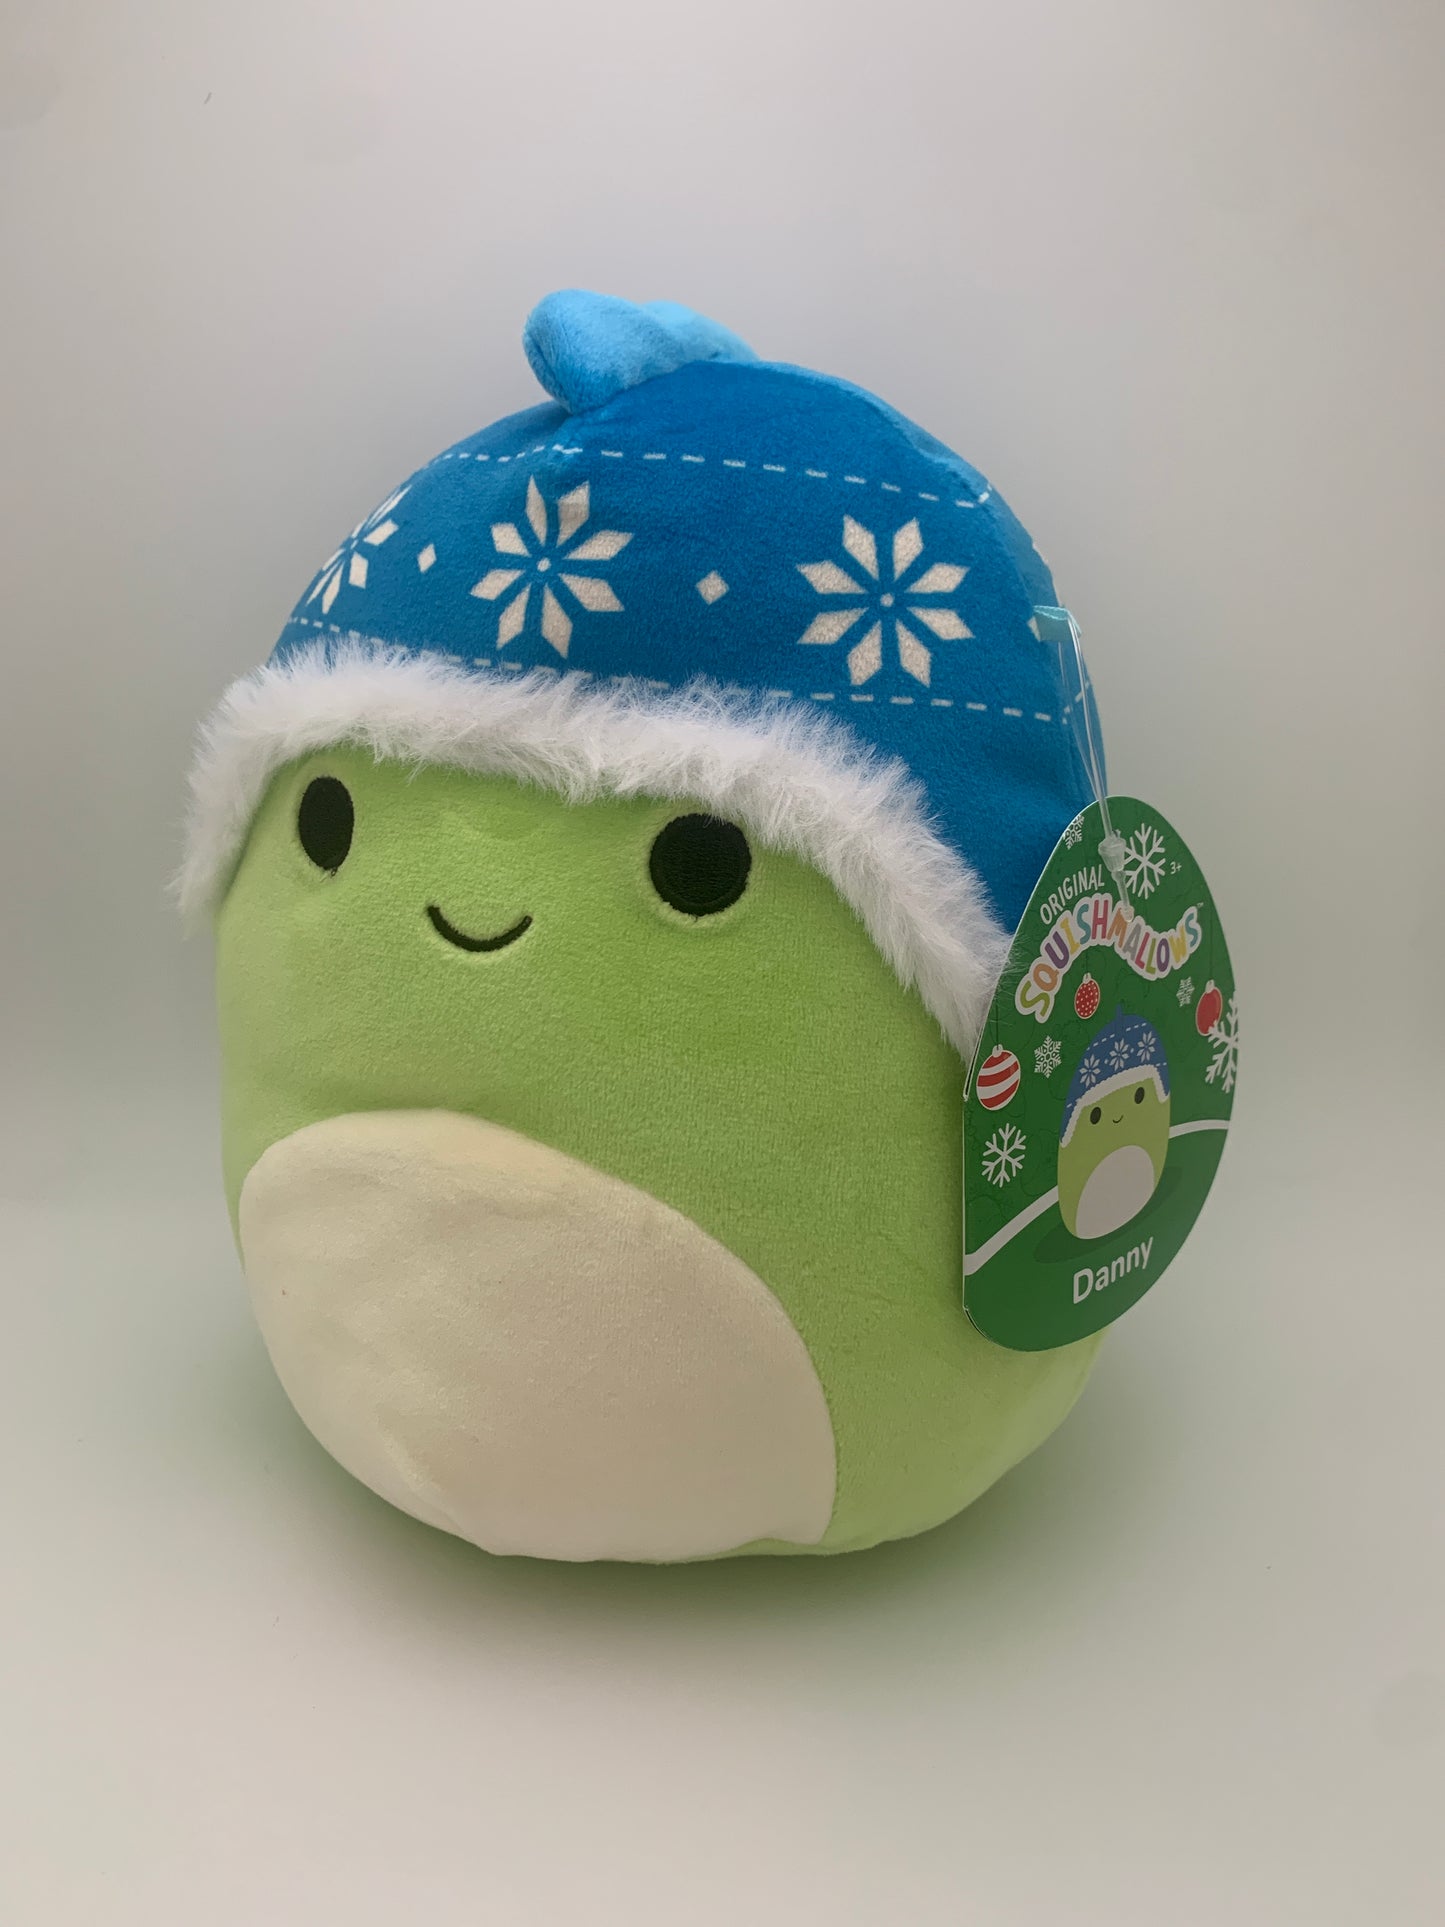 Squishmallow Danny with Winter Beanie 7.5 inch